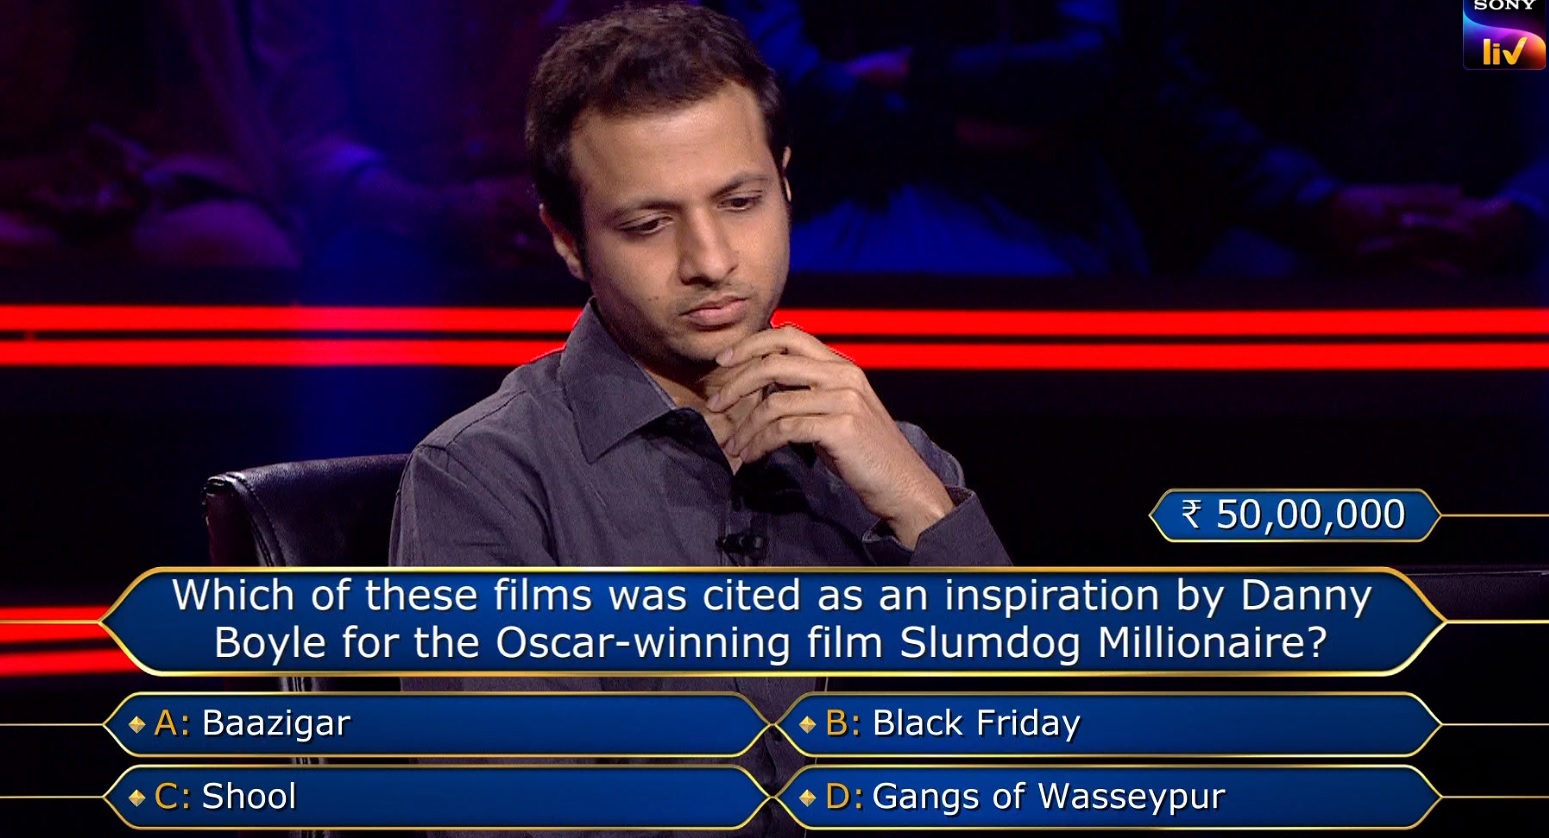 Ques : Which of these films was cited as an inspiration by Danny Boyle for the Oscar-winning film Slumdog Millionaire?